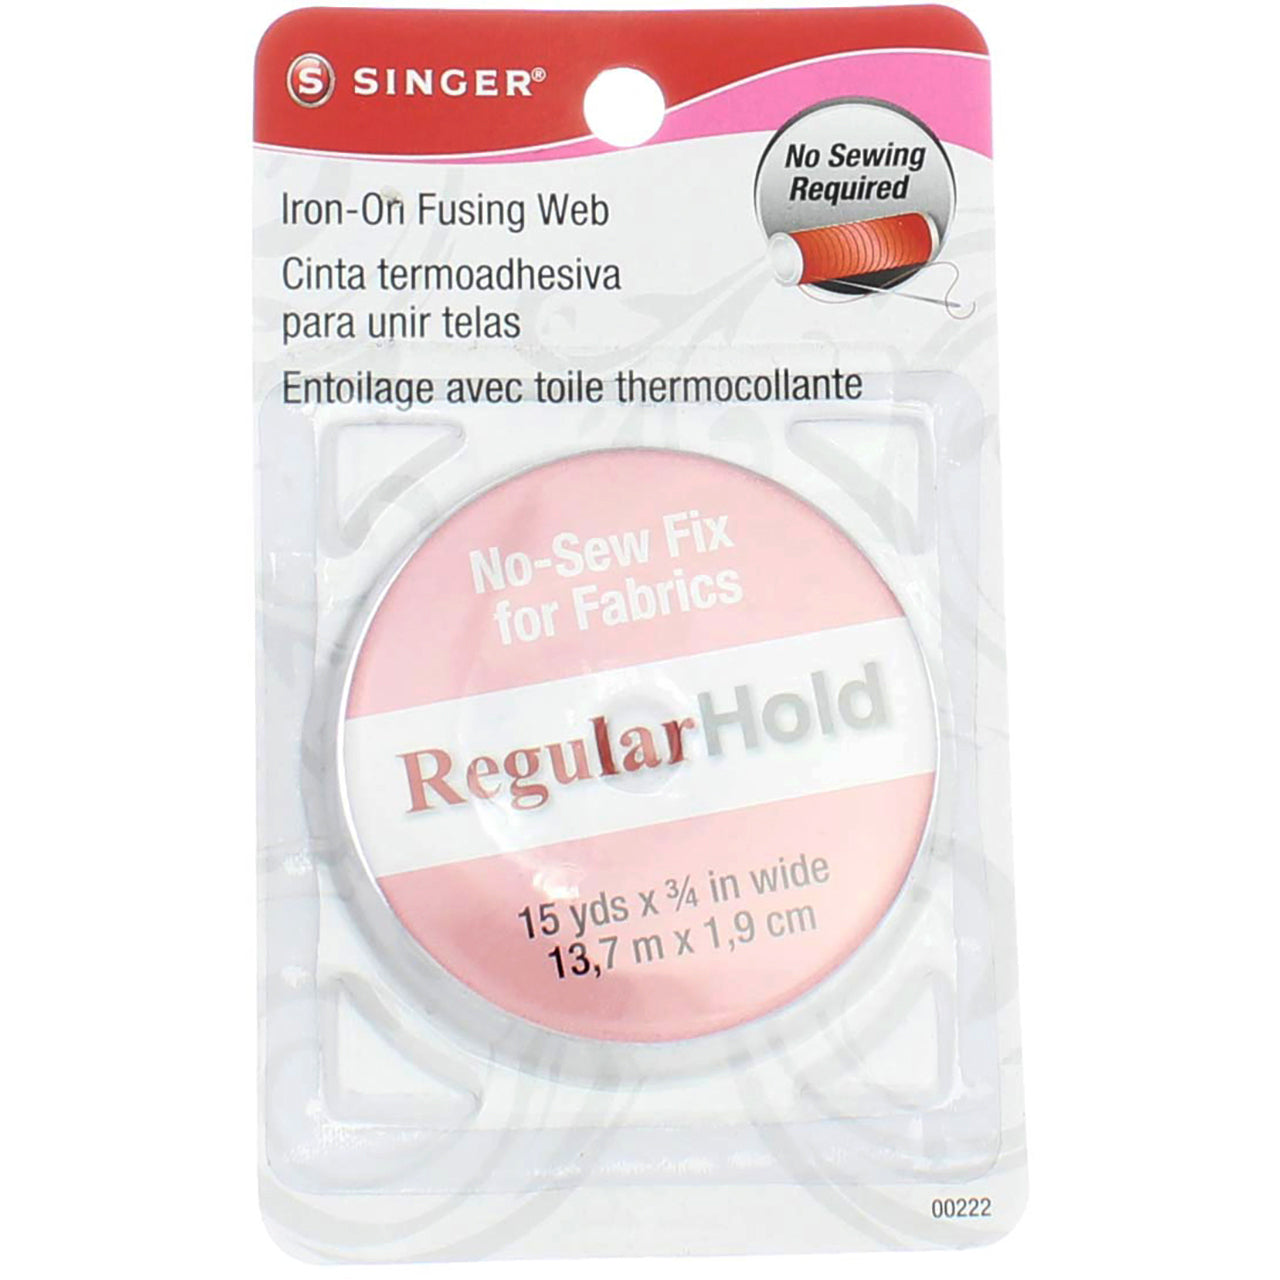 Singer Iron-on Fusing Web Regular Hold Cut To Size Quick Fix 15 yards x 3/4  inch